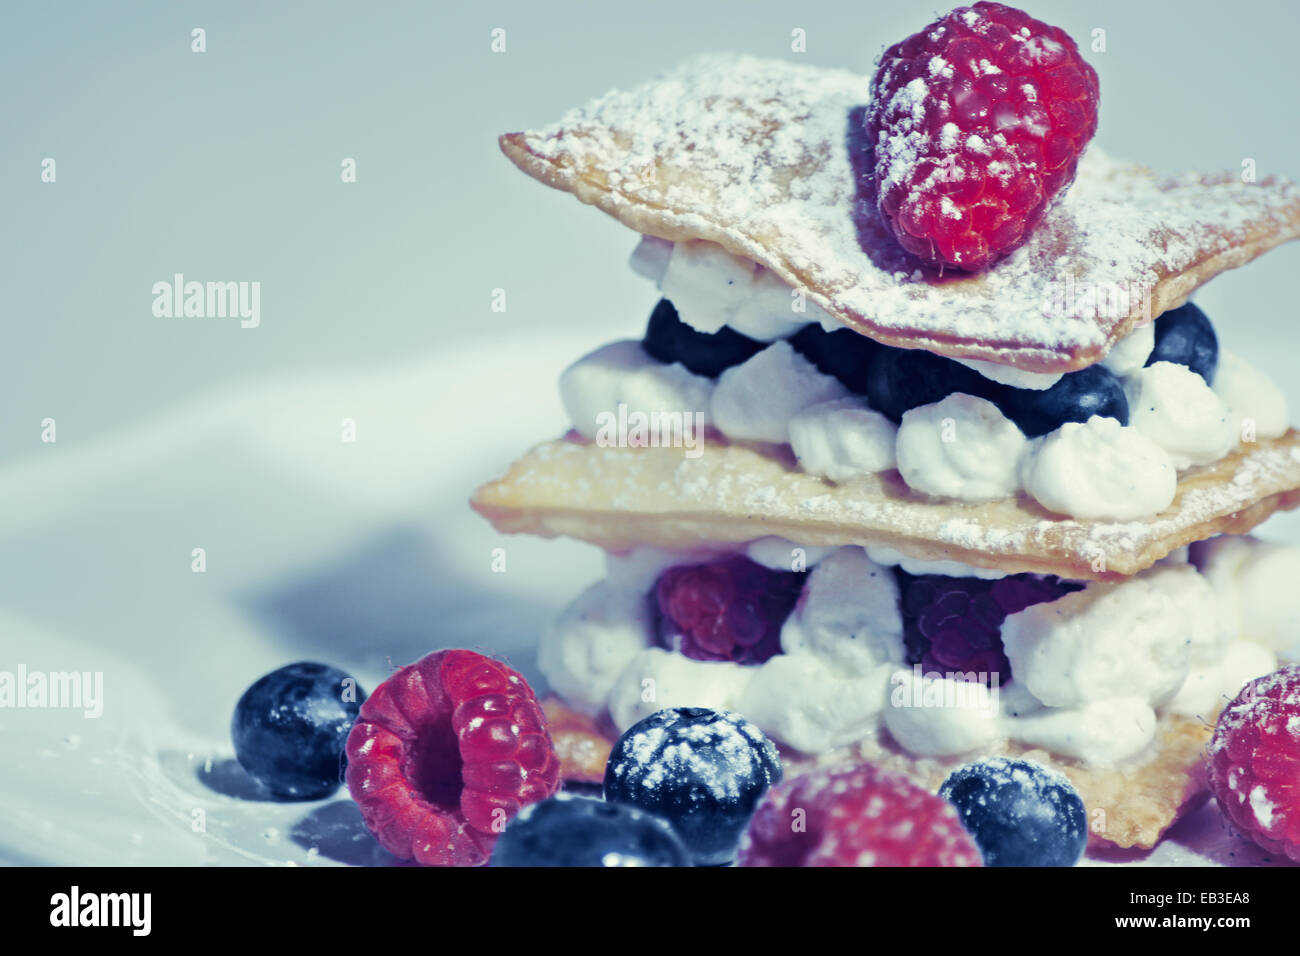 Mille-feuille pastry with summer fruits and whipped cream Stock Photo